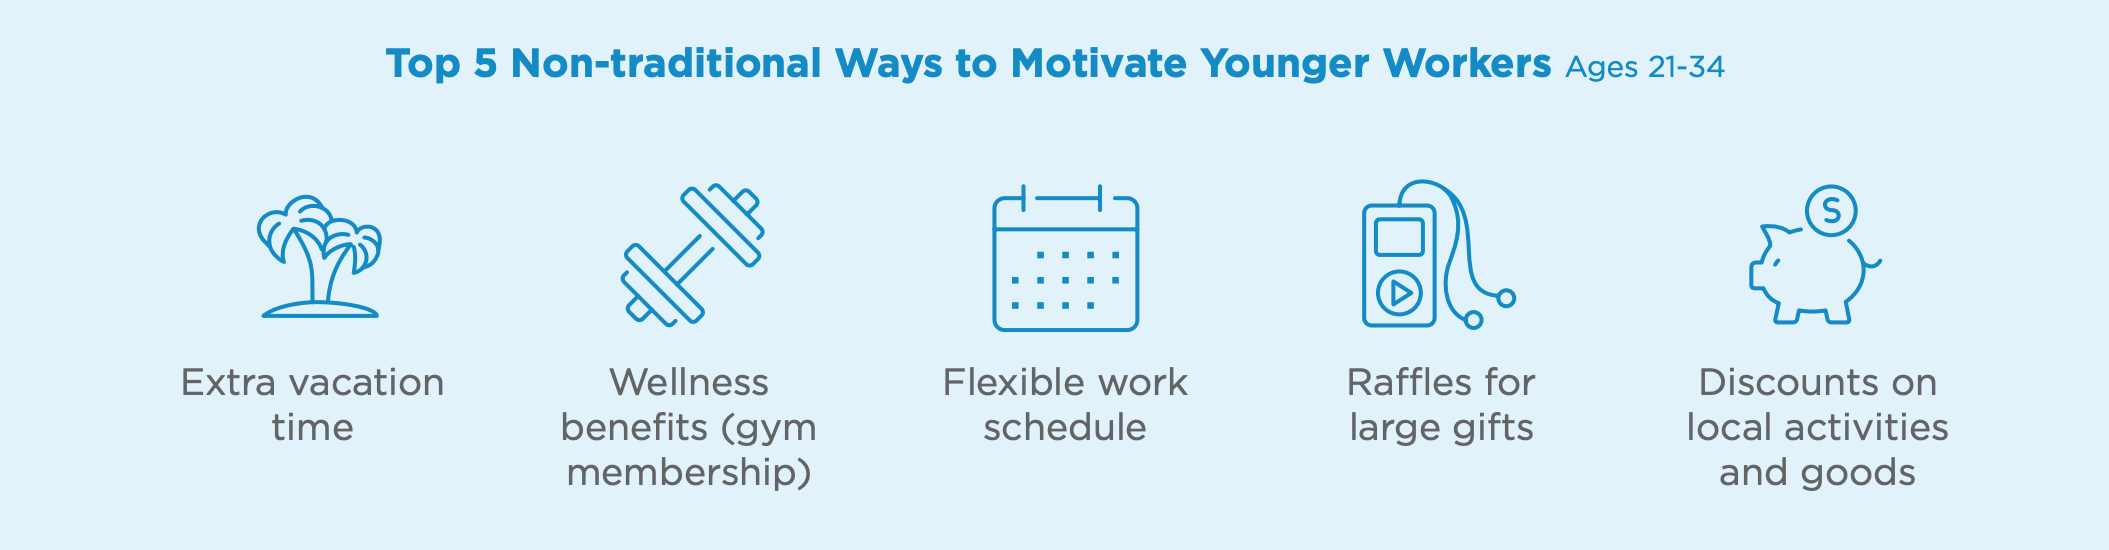 Top 5 Non-traditional ways to motivate younger workers